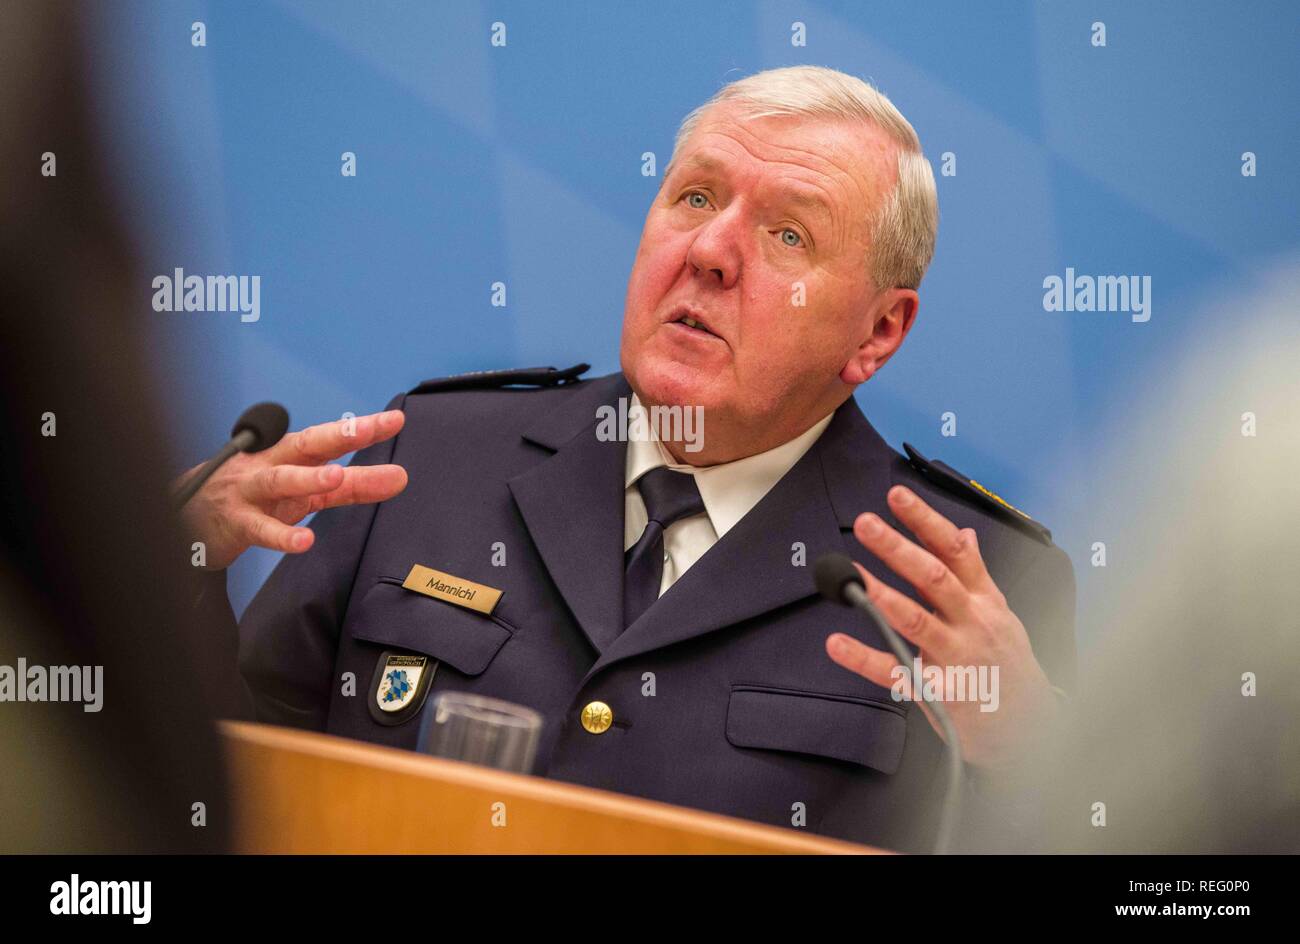 Munich, Bavaria, Germany. 21st Jan, 2019. Direktor der Bayerischen Grenzpolizei ALOIS MANNICHL. The Bavarian Innenminister Joachim Herrmann and the Direktor der Bayerischen Grenzpolizei Alois Mannichl presented the half year statistics of the controversial border police (Grenzpolizei) that operates at the border crossings between Germany and Austria. Herrmann announced plans to double the border protection police by 2023.ment including endoscopes for detection of smuggled items. The Grenzschutzpolizei was originally created by Bavar Credit: ZUMA Press, Inc./Alamy Live News Stock Photo